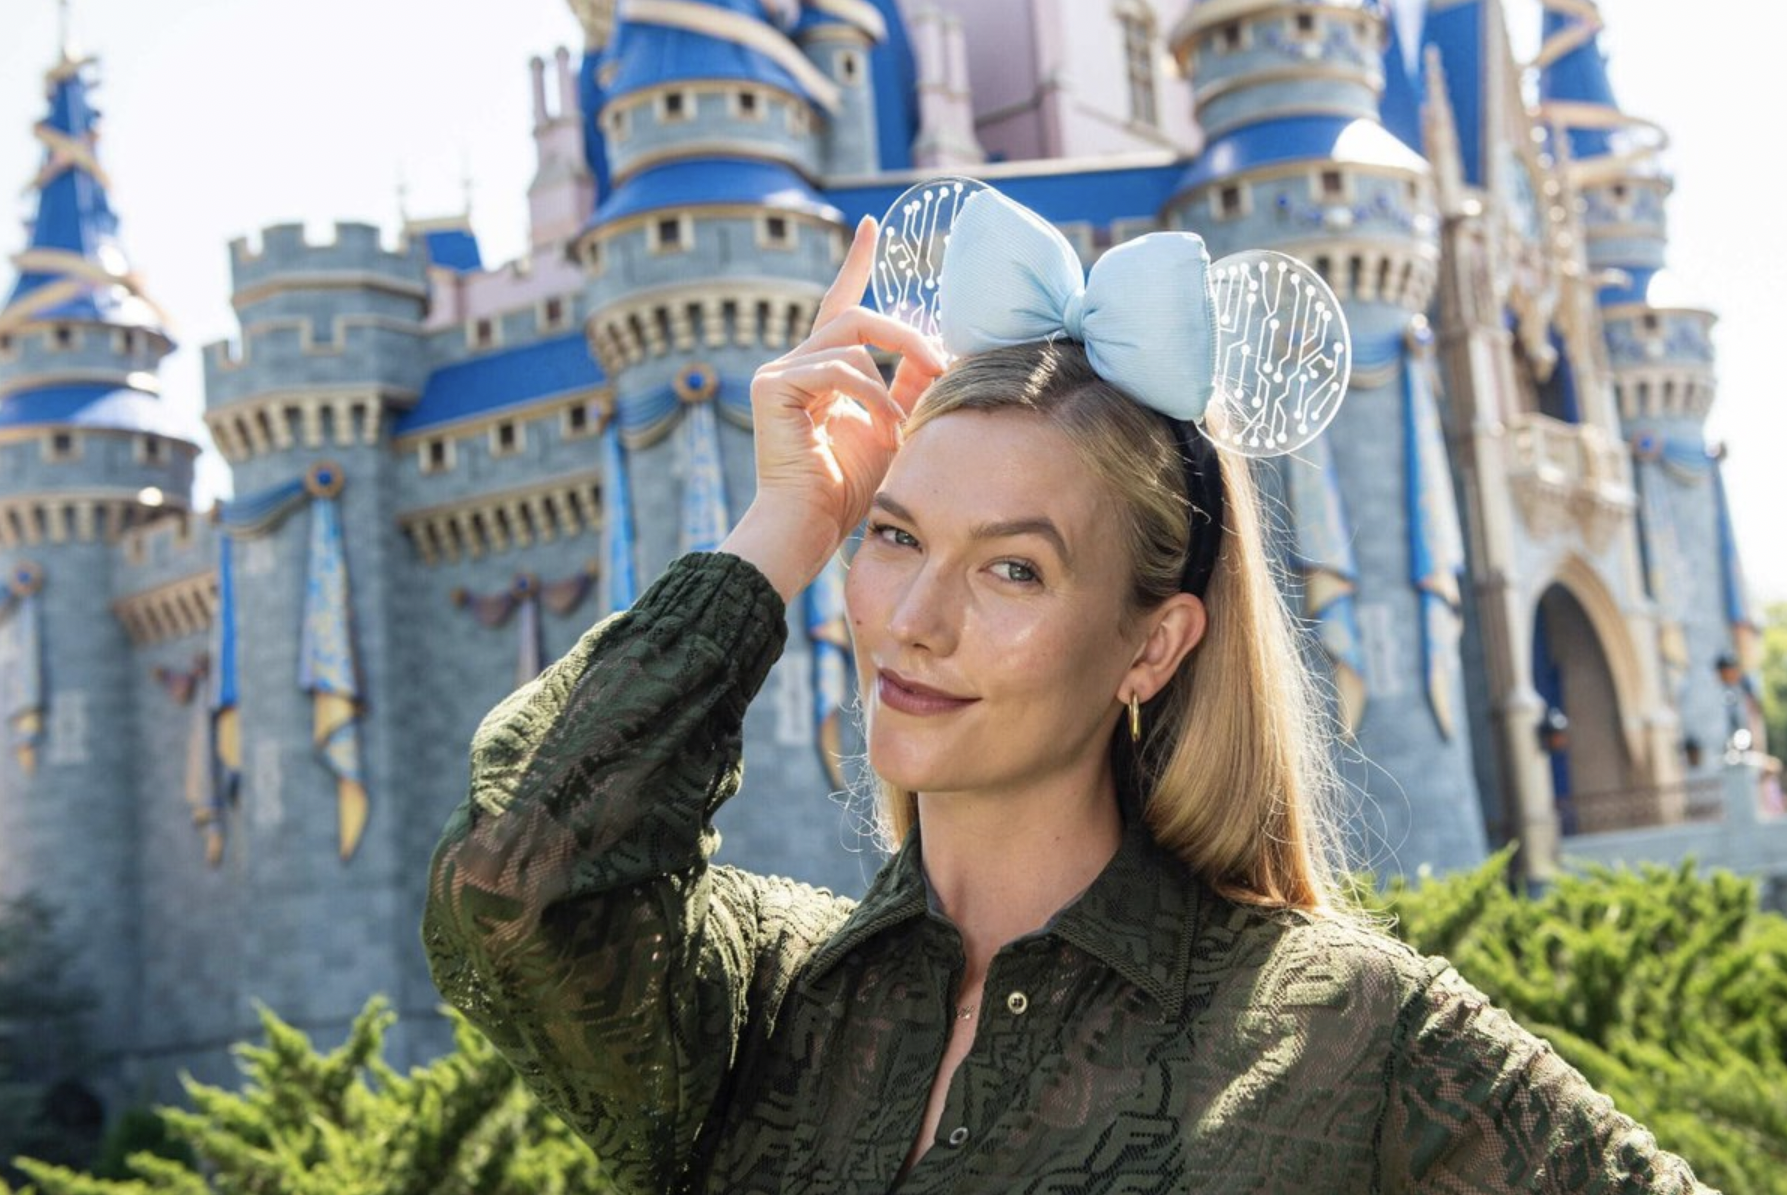 PHOTOS: The Newest Disney Designer Ears Will Require a Secret Code